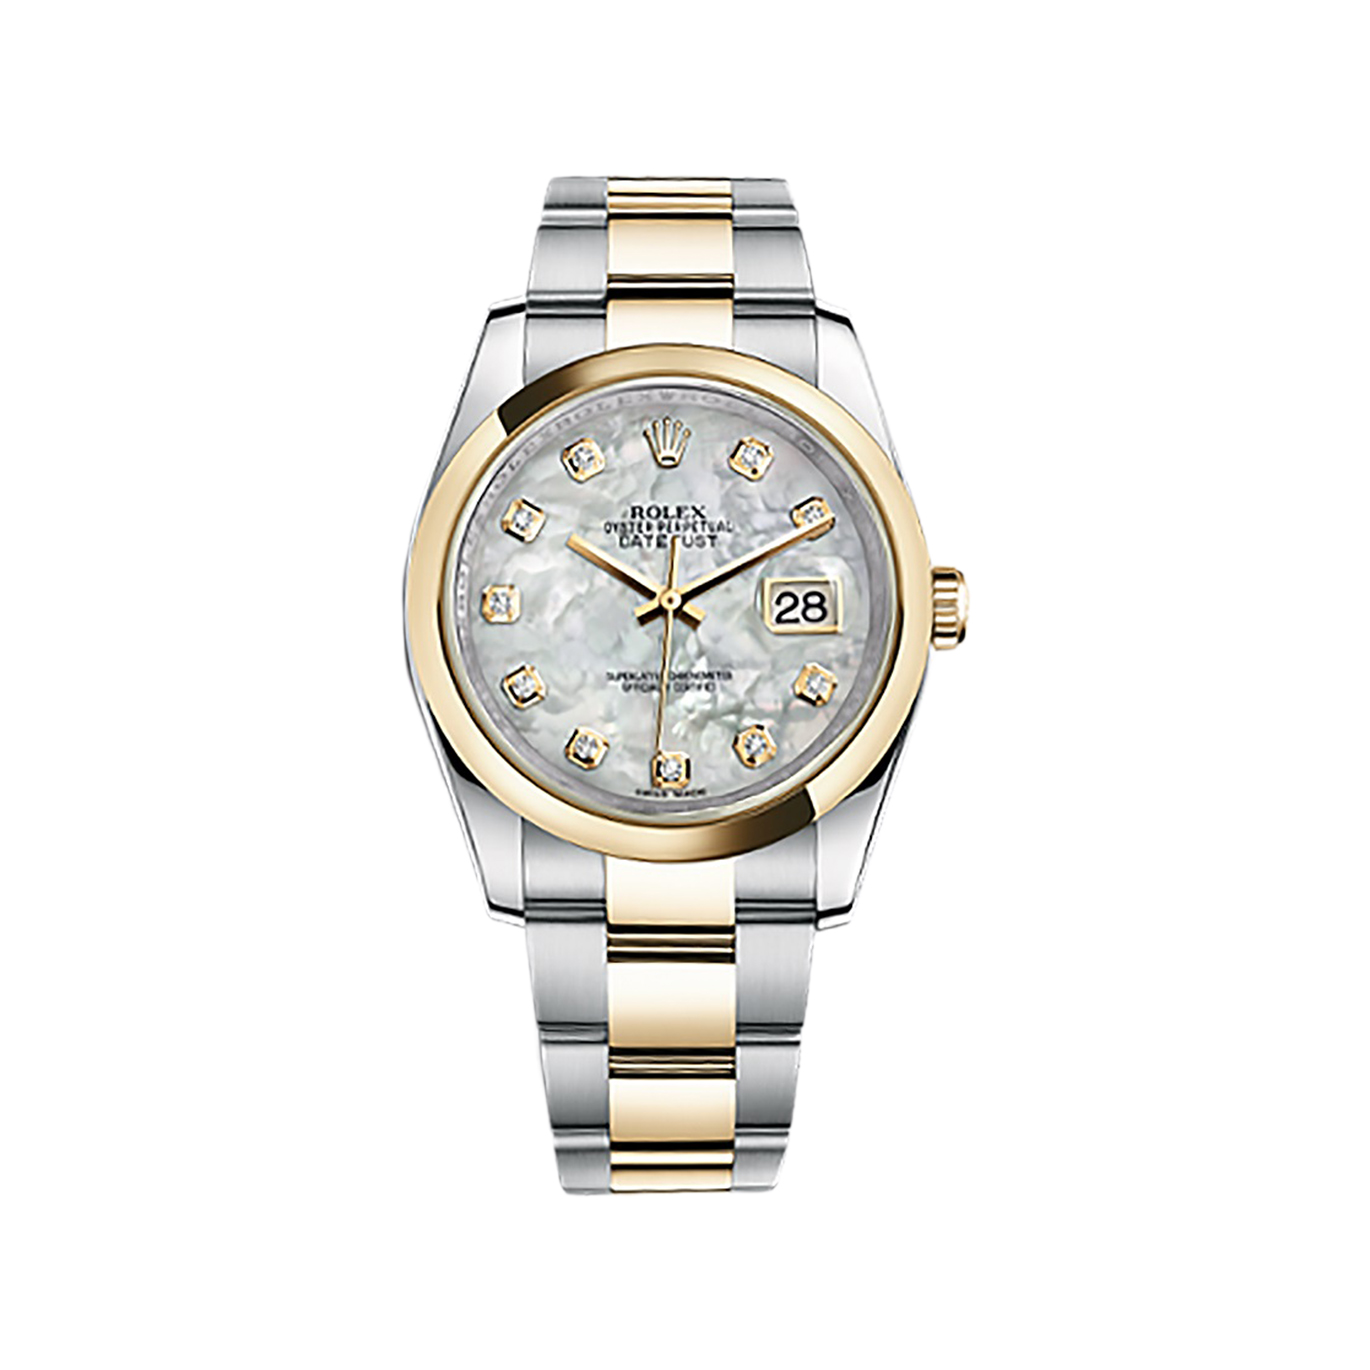 Datejust 36 116203 Gold & Stainless Steel Watch (White Mother-of-Pearl Set with Diamonds)